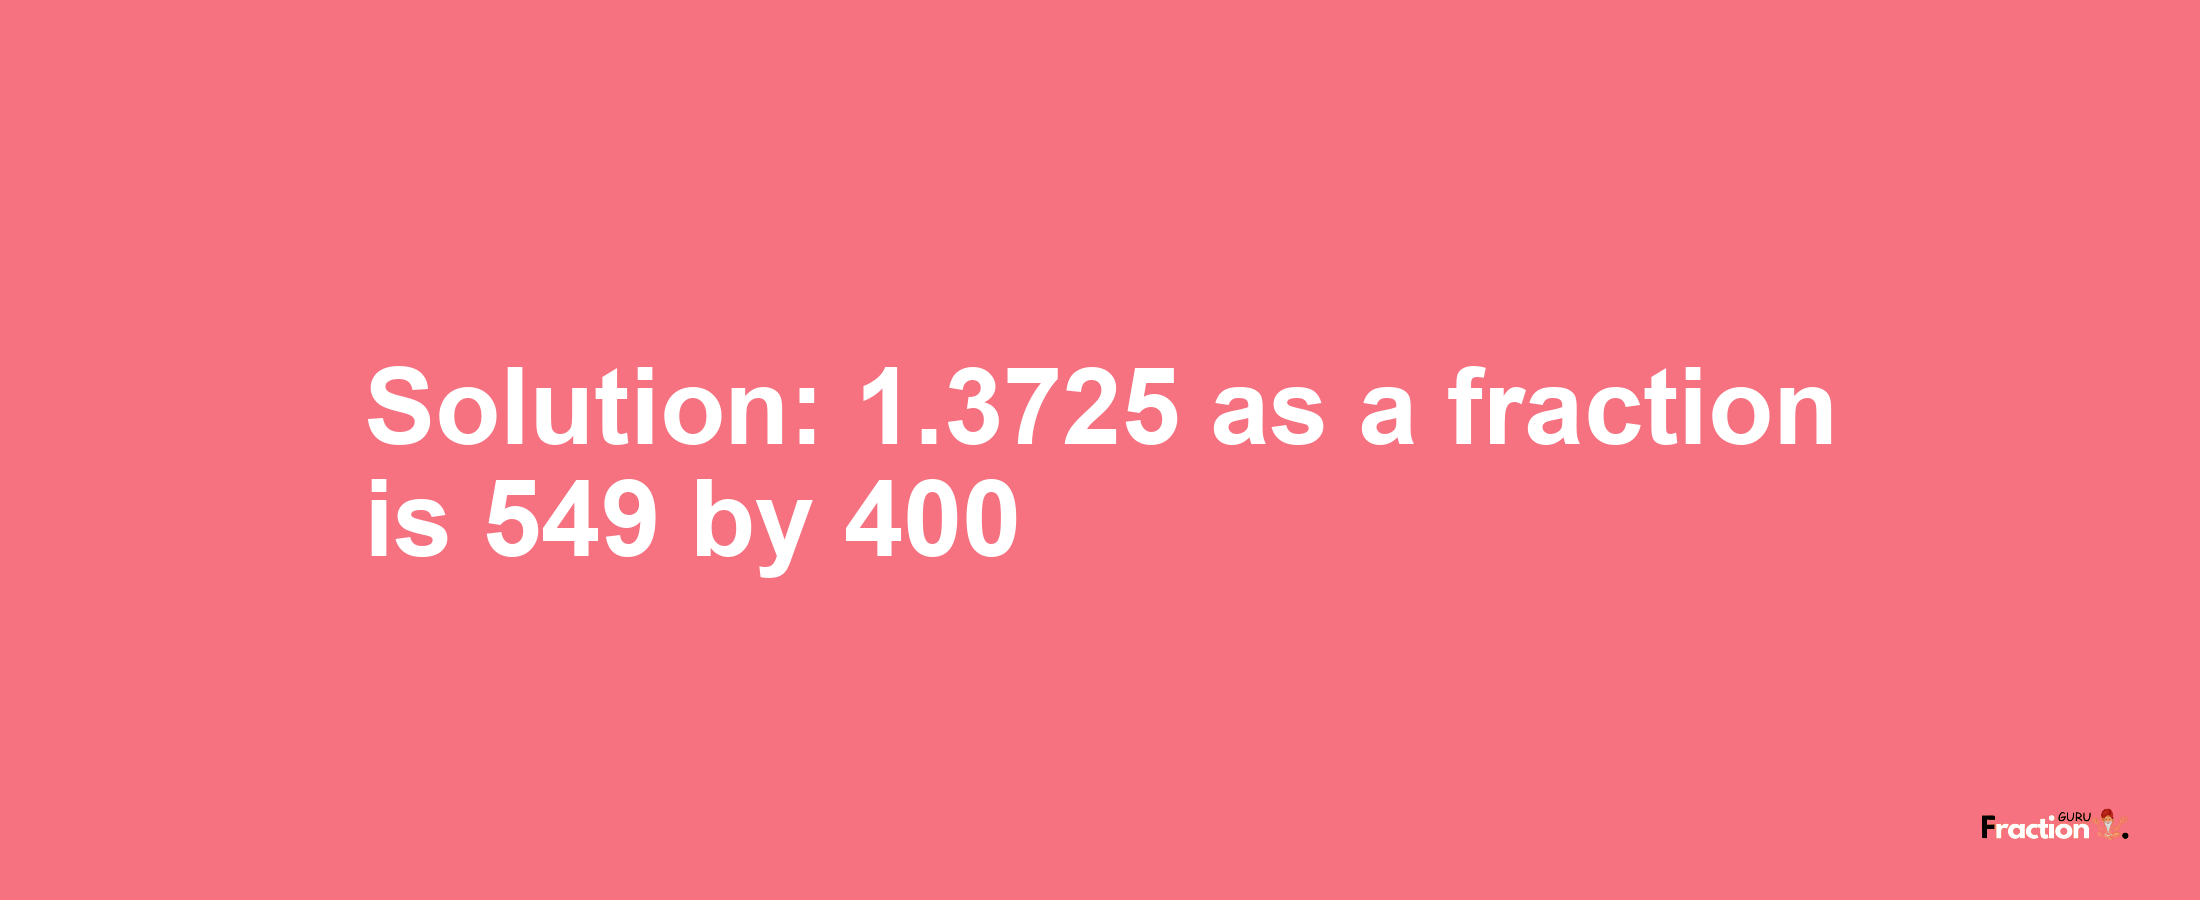 Solution:1.3725 as a fraction is 549/400